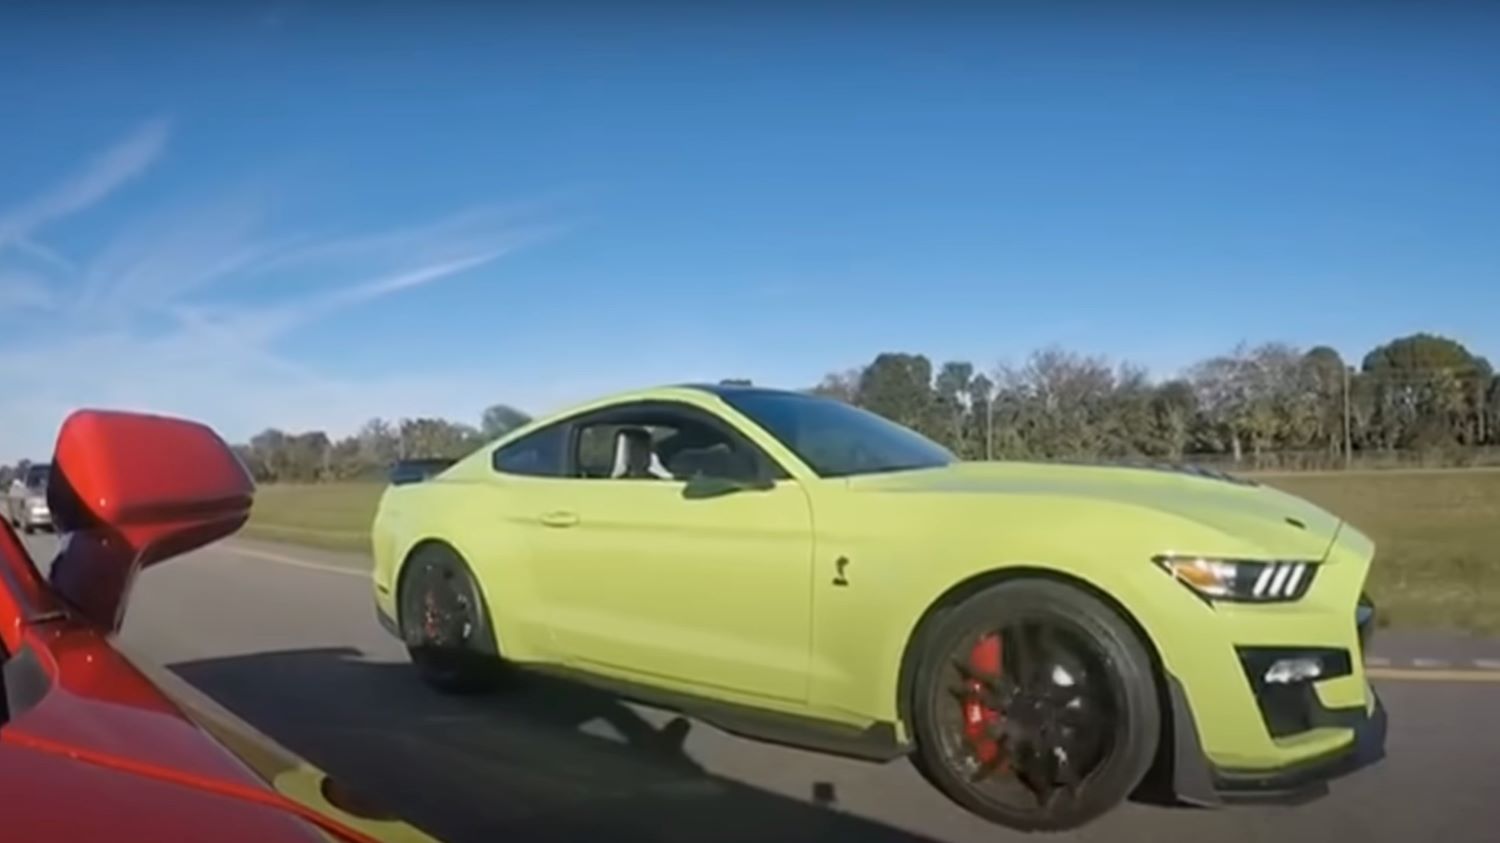 2020 Shelby GT500 Finds Formidable Foe In Modded Camaro ZL1: Video